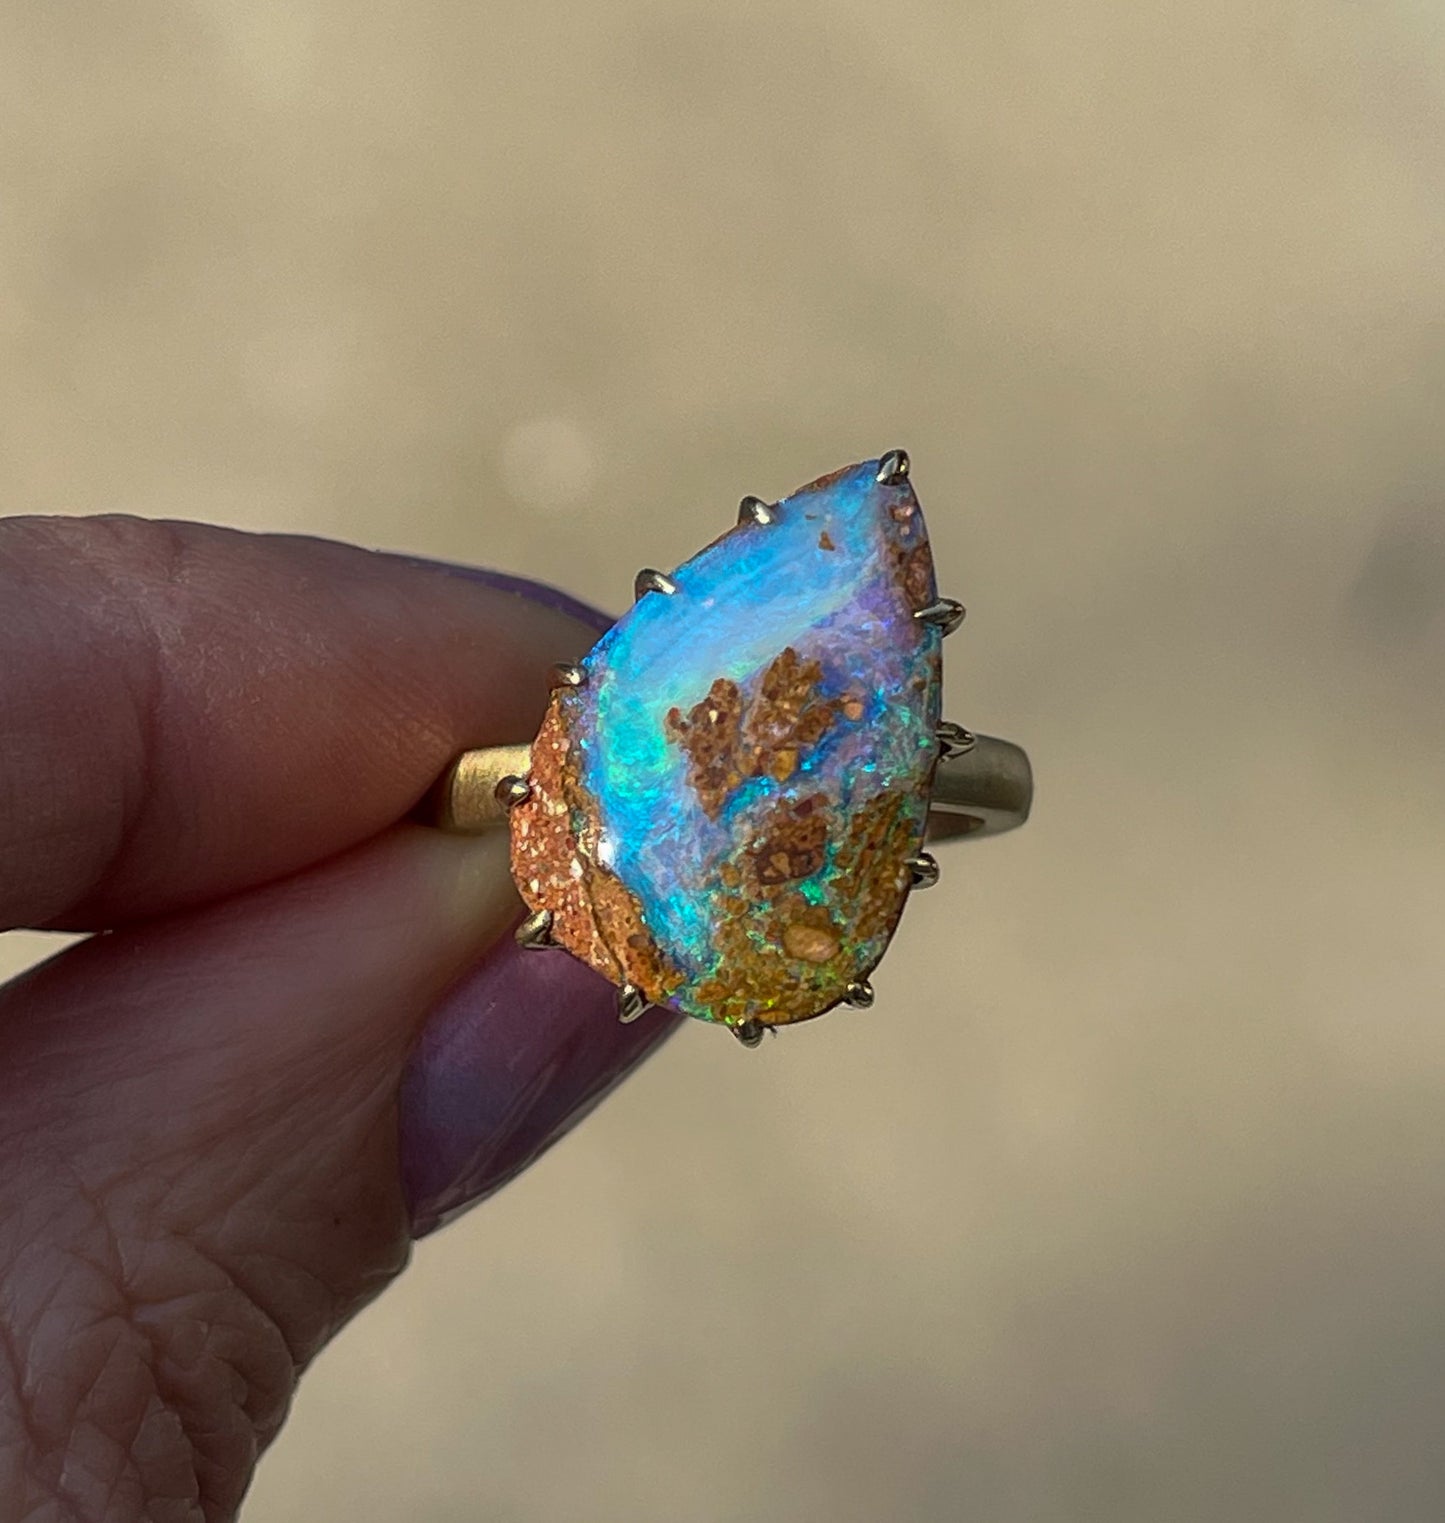 A NIXIN Jewelry Australian Opal Ring is held up in late afternoon sunlight displaying its bold purple and blue hues. 